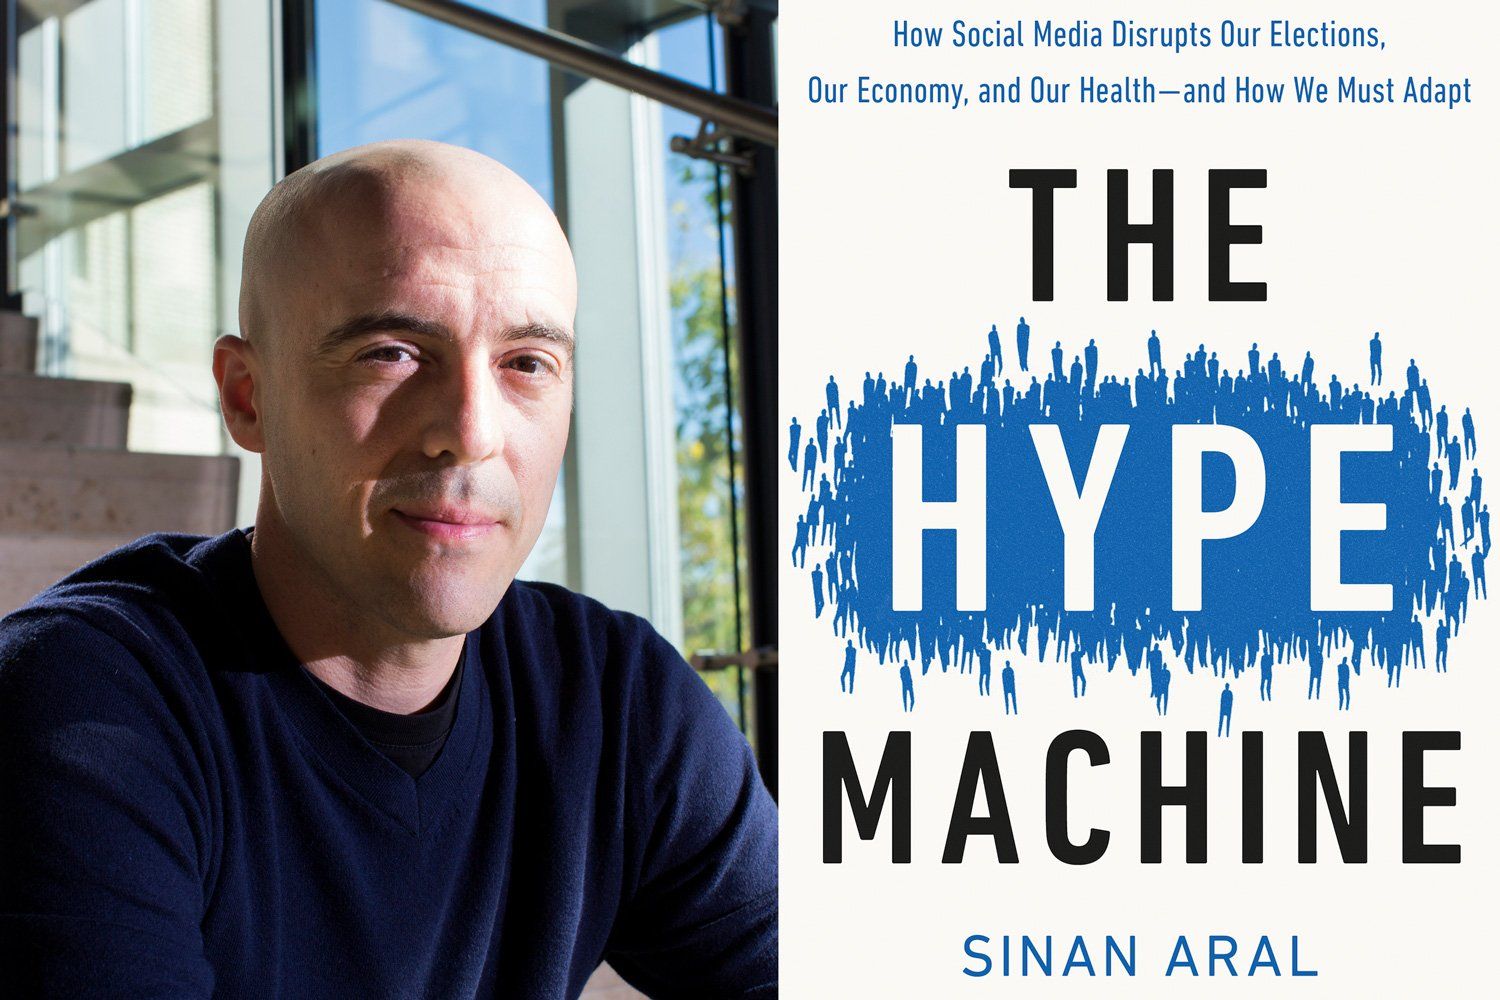 Sinan Aral, a professor of management at the MIT Sloan Schoo